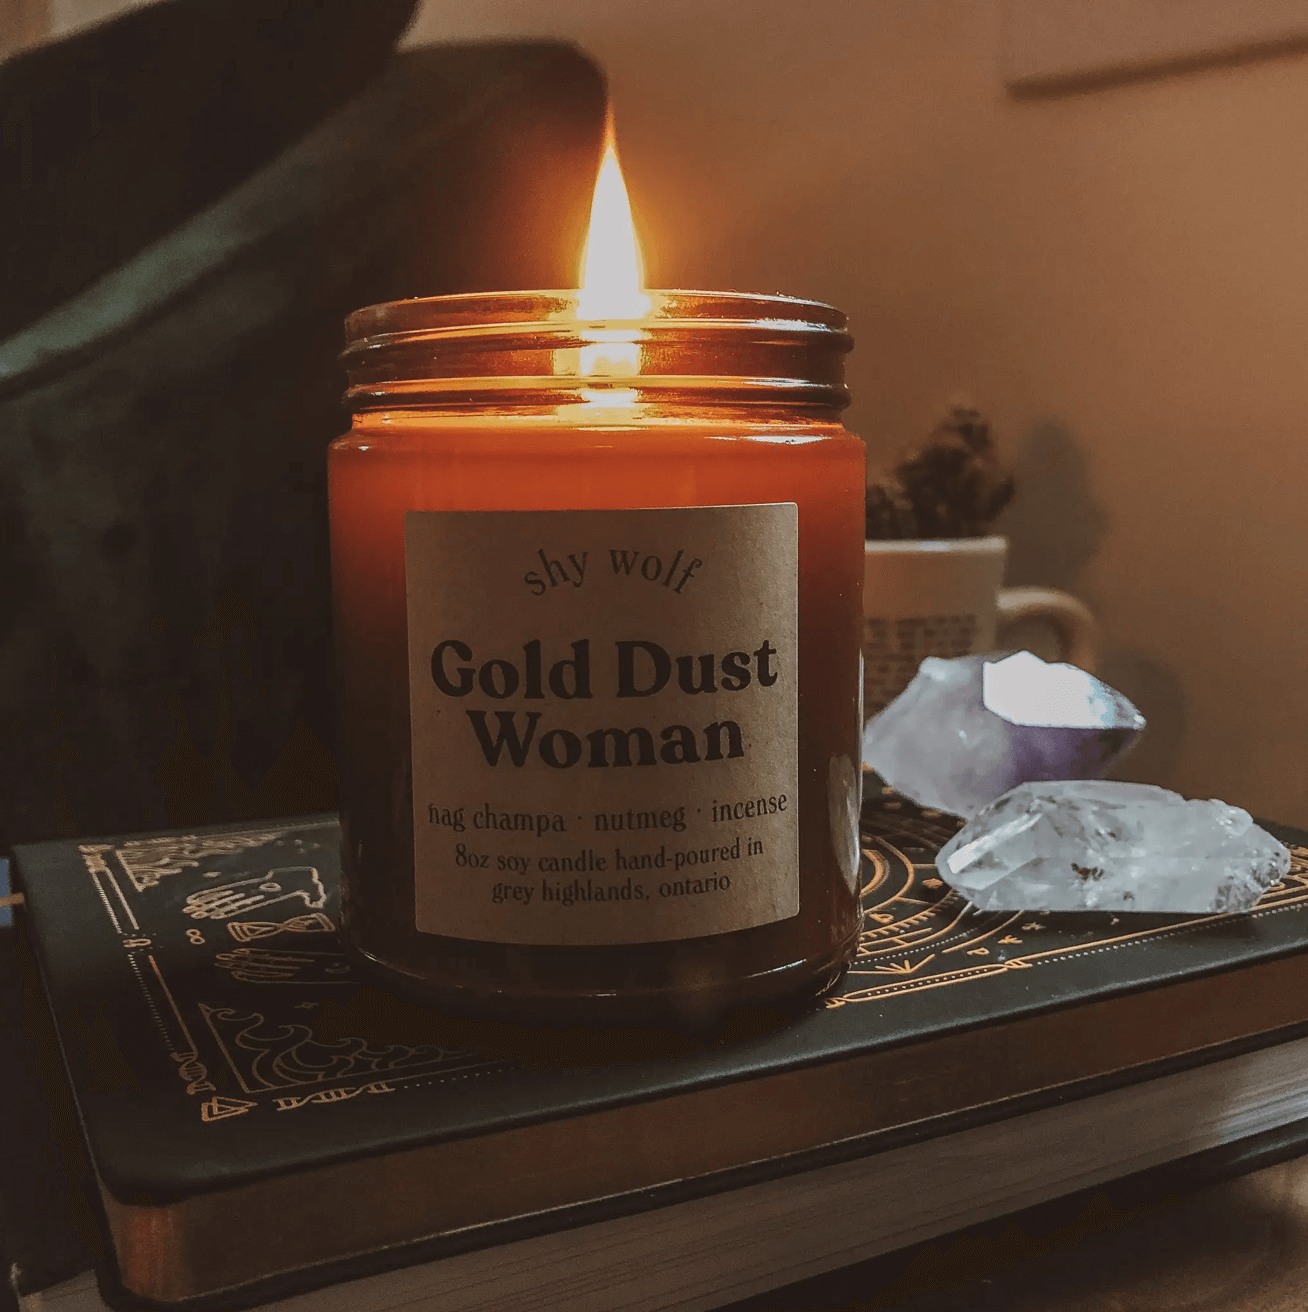 Shy Wolf_Gold Dust Woman Soy Candle - Incense, Nag Champa, Nutmeg - Skies For Miles